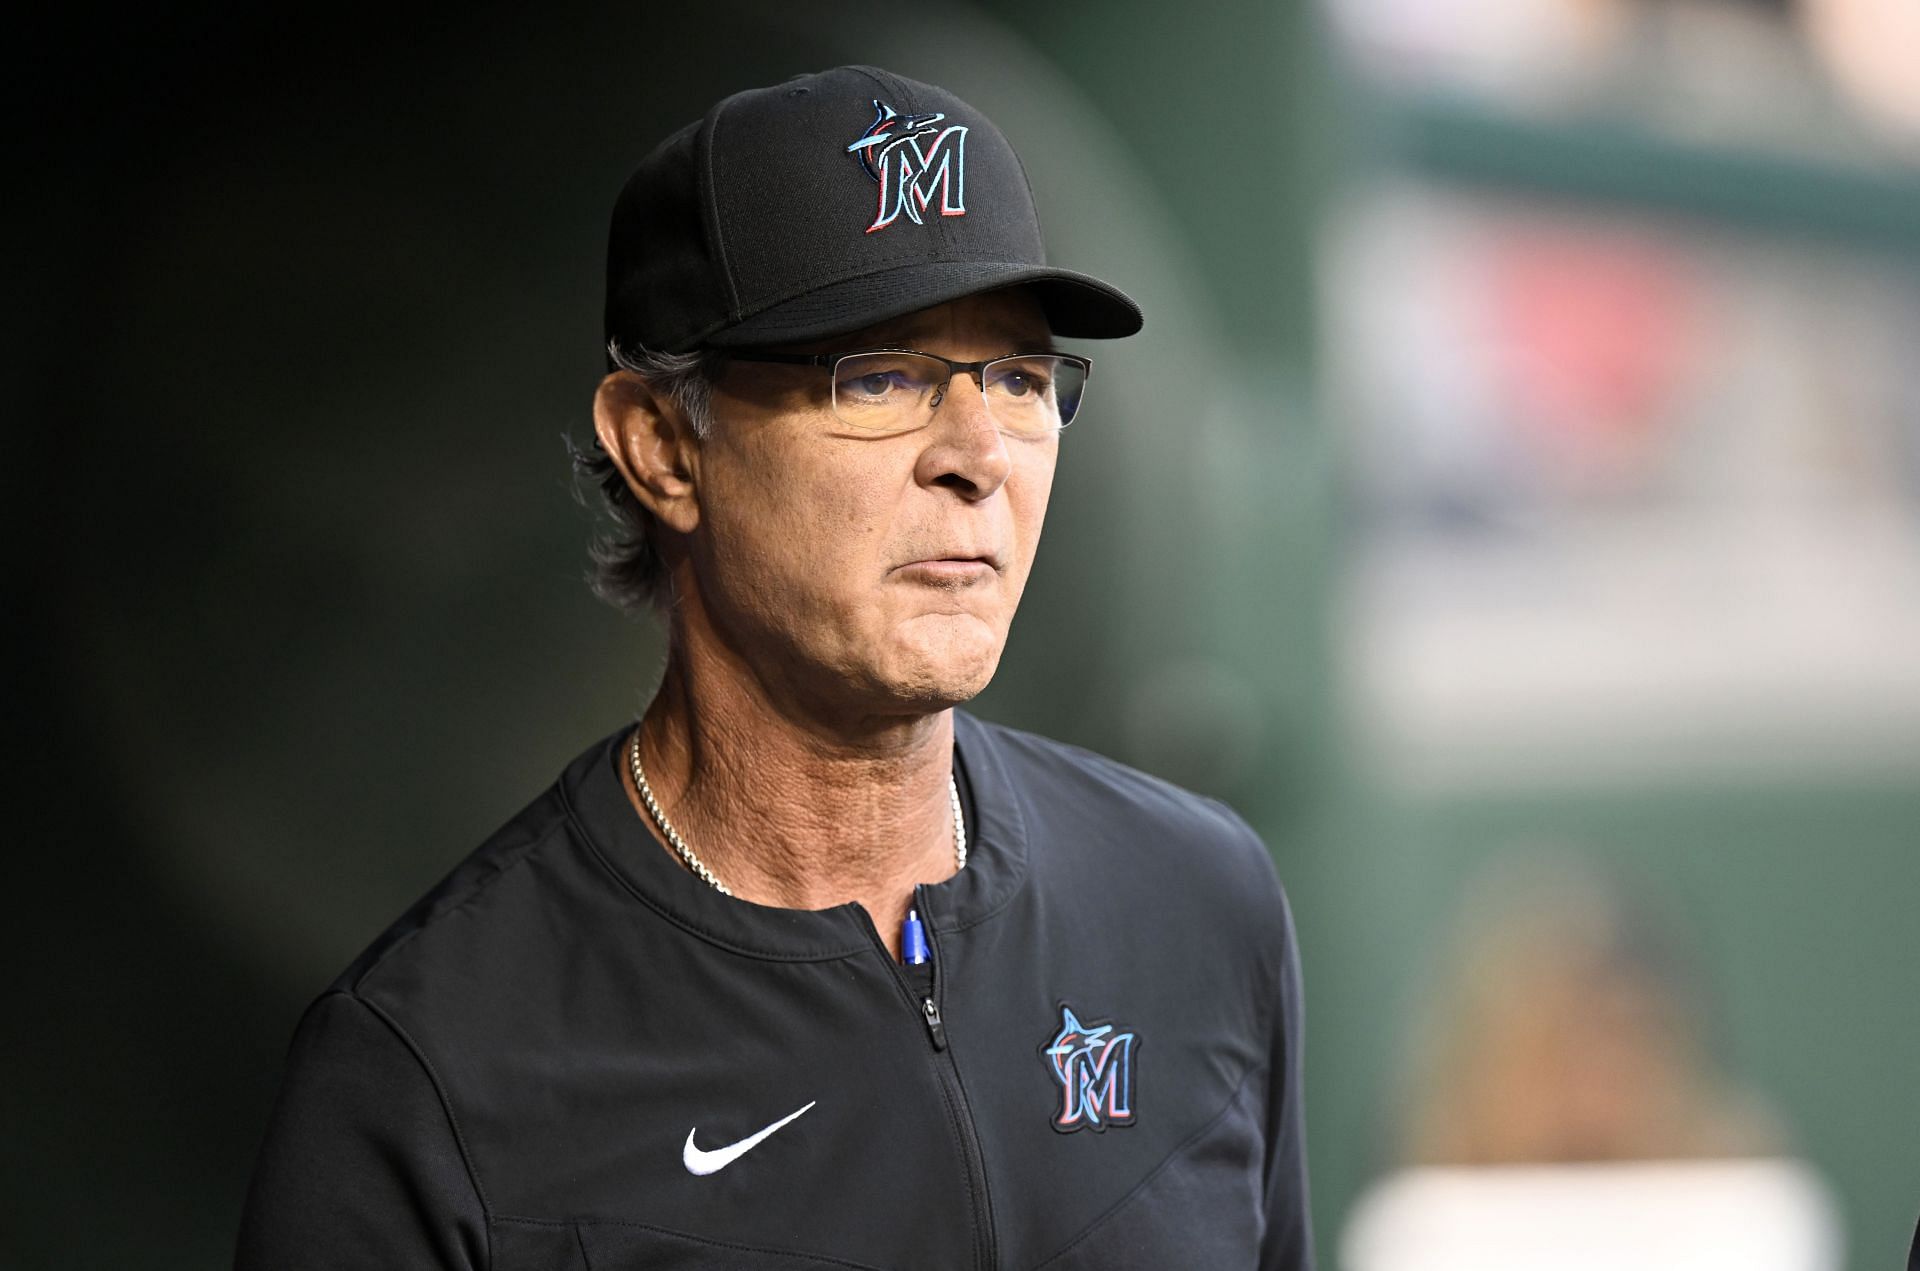 Blue Jays fans poke fun at Yankees fanbase after landing former Bombers  captain Don Mattingly in coaching role